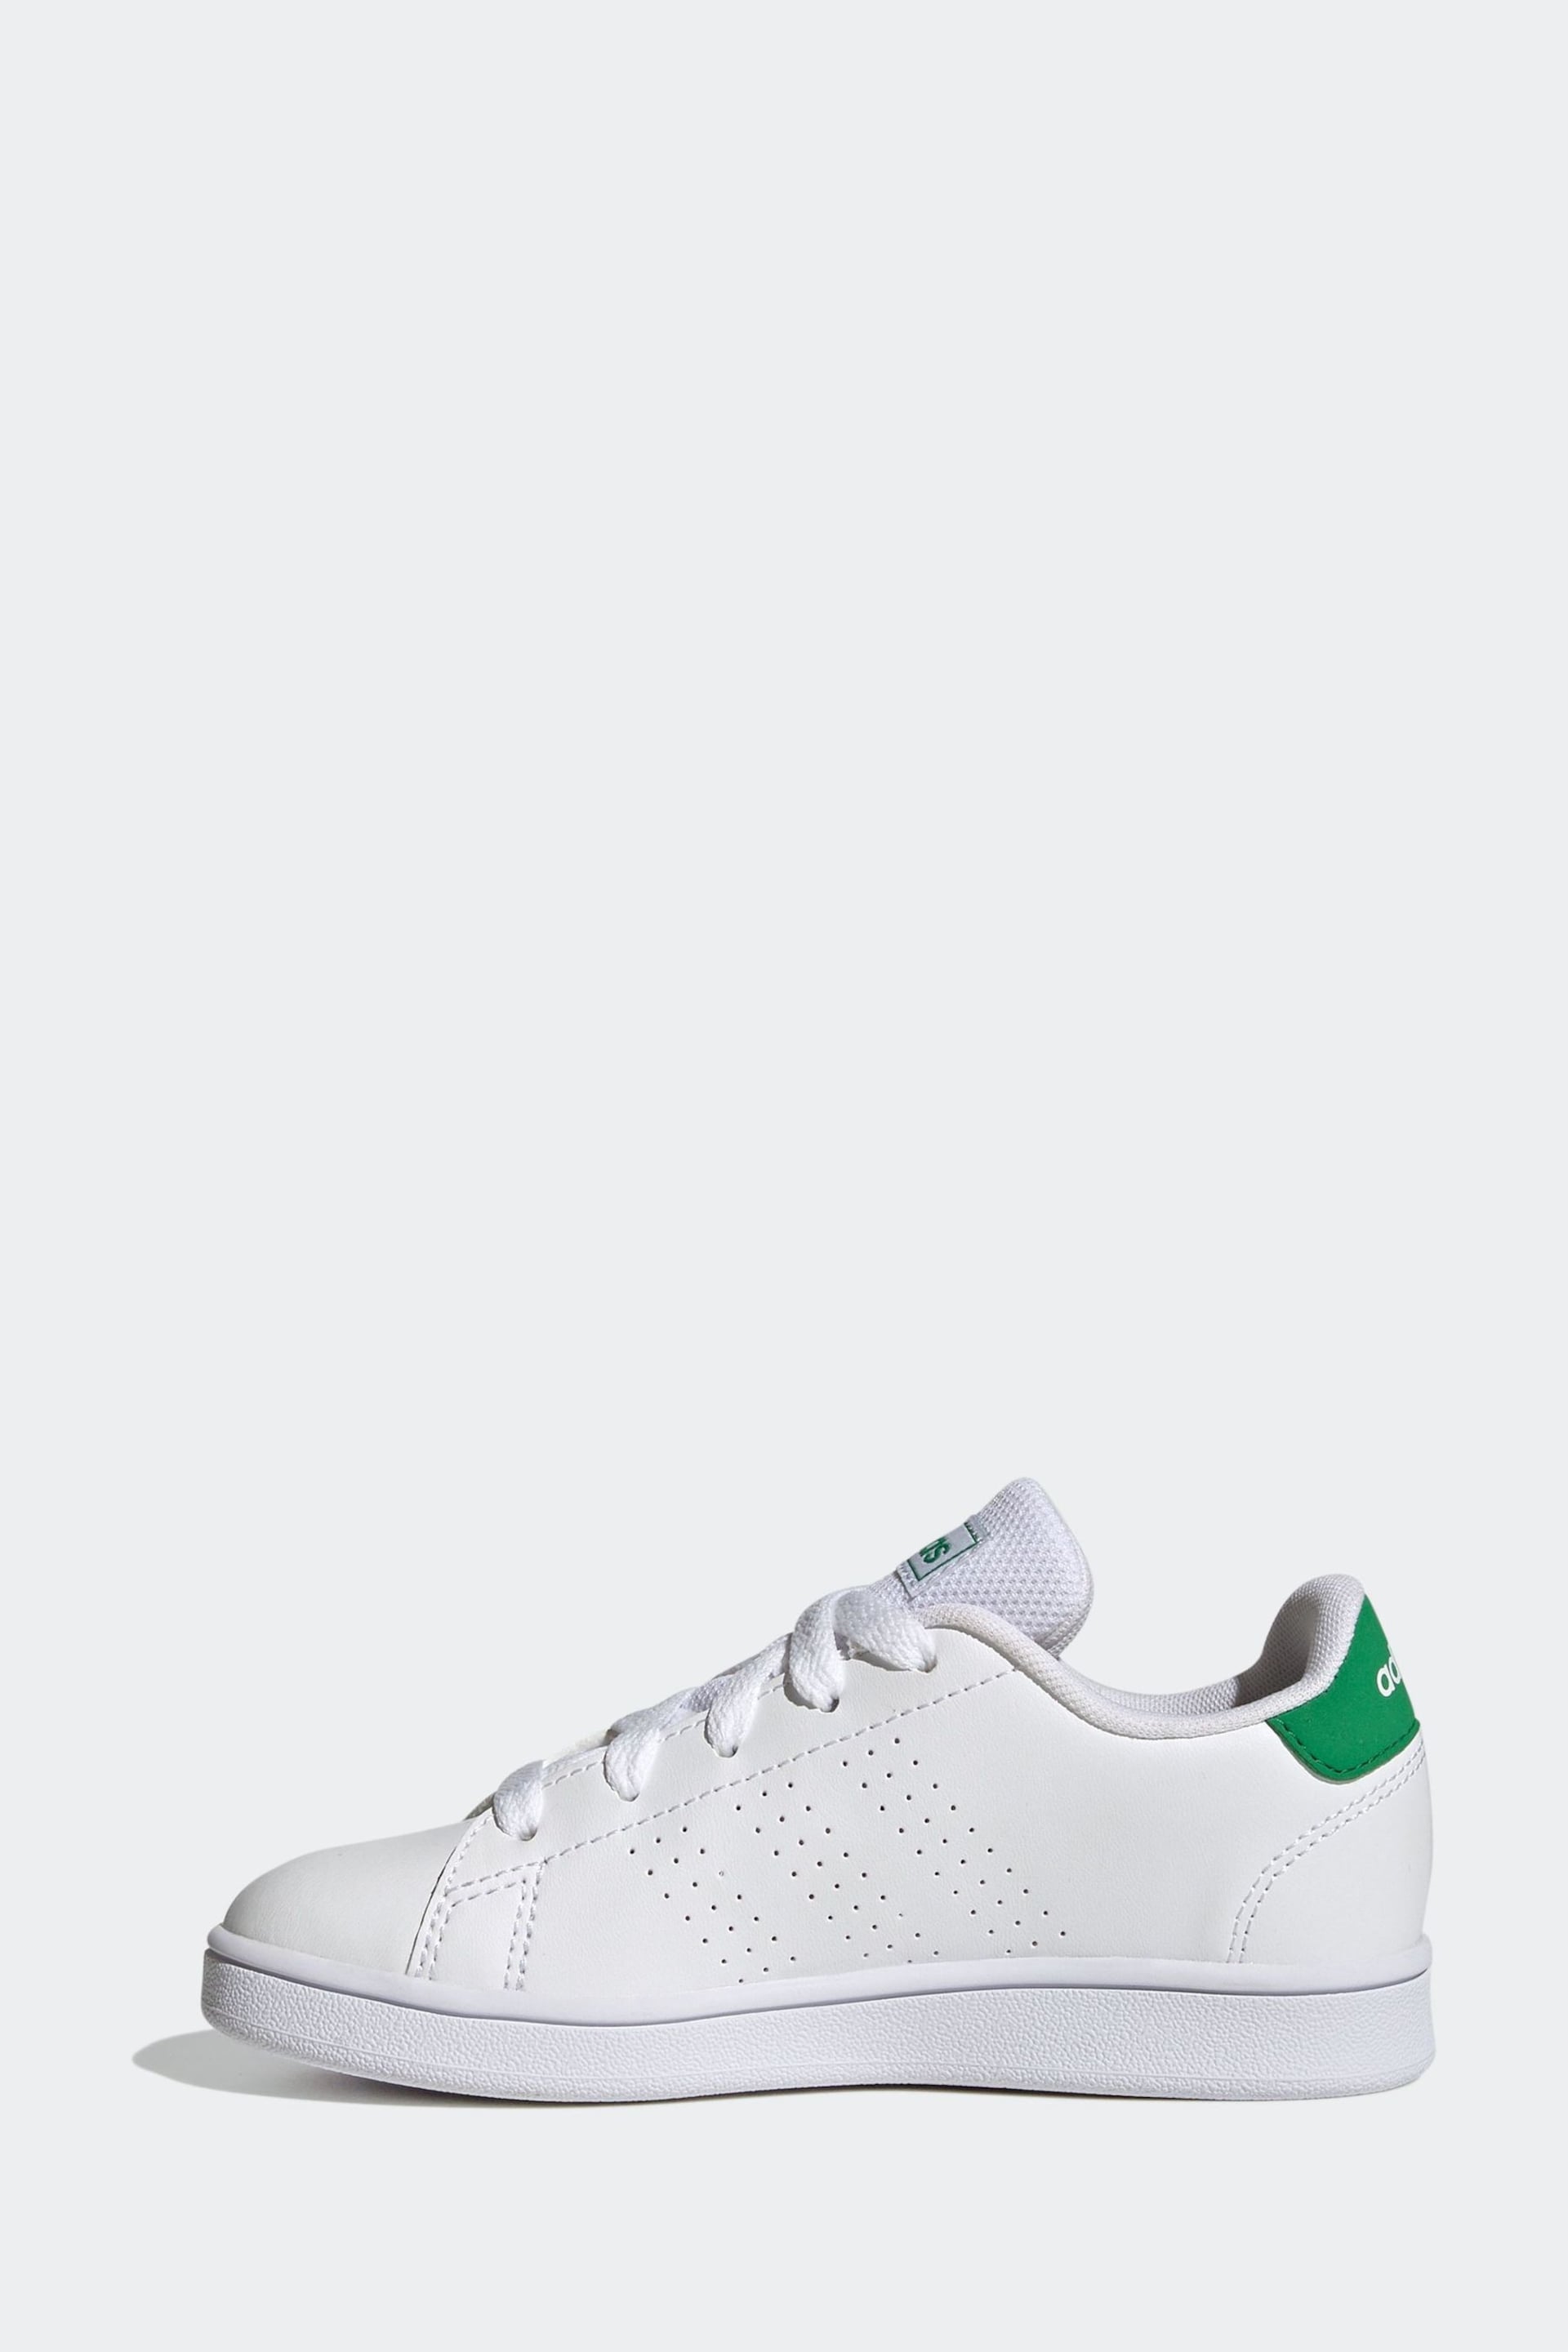 adidas Green/White Sportswear Advantage Lifestyle Court Lace Trainers - Image 2 of 9